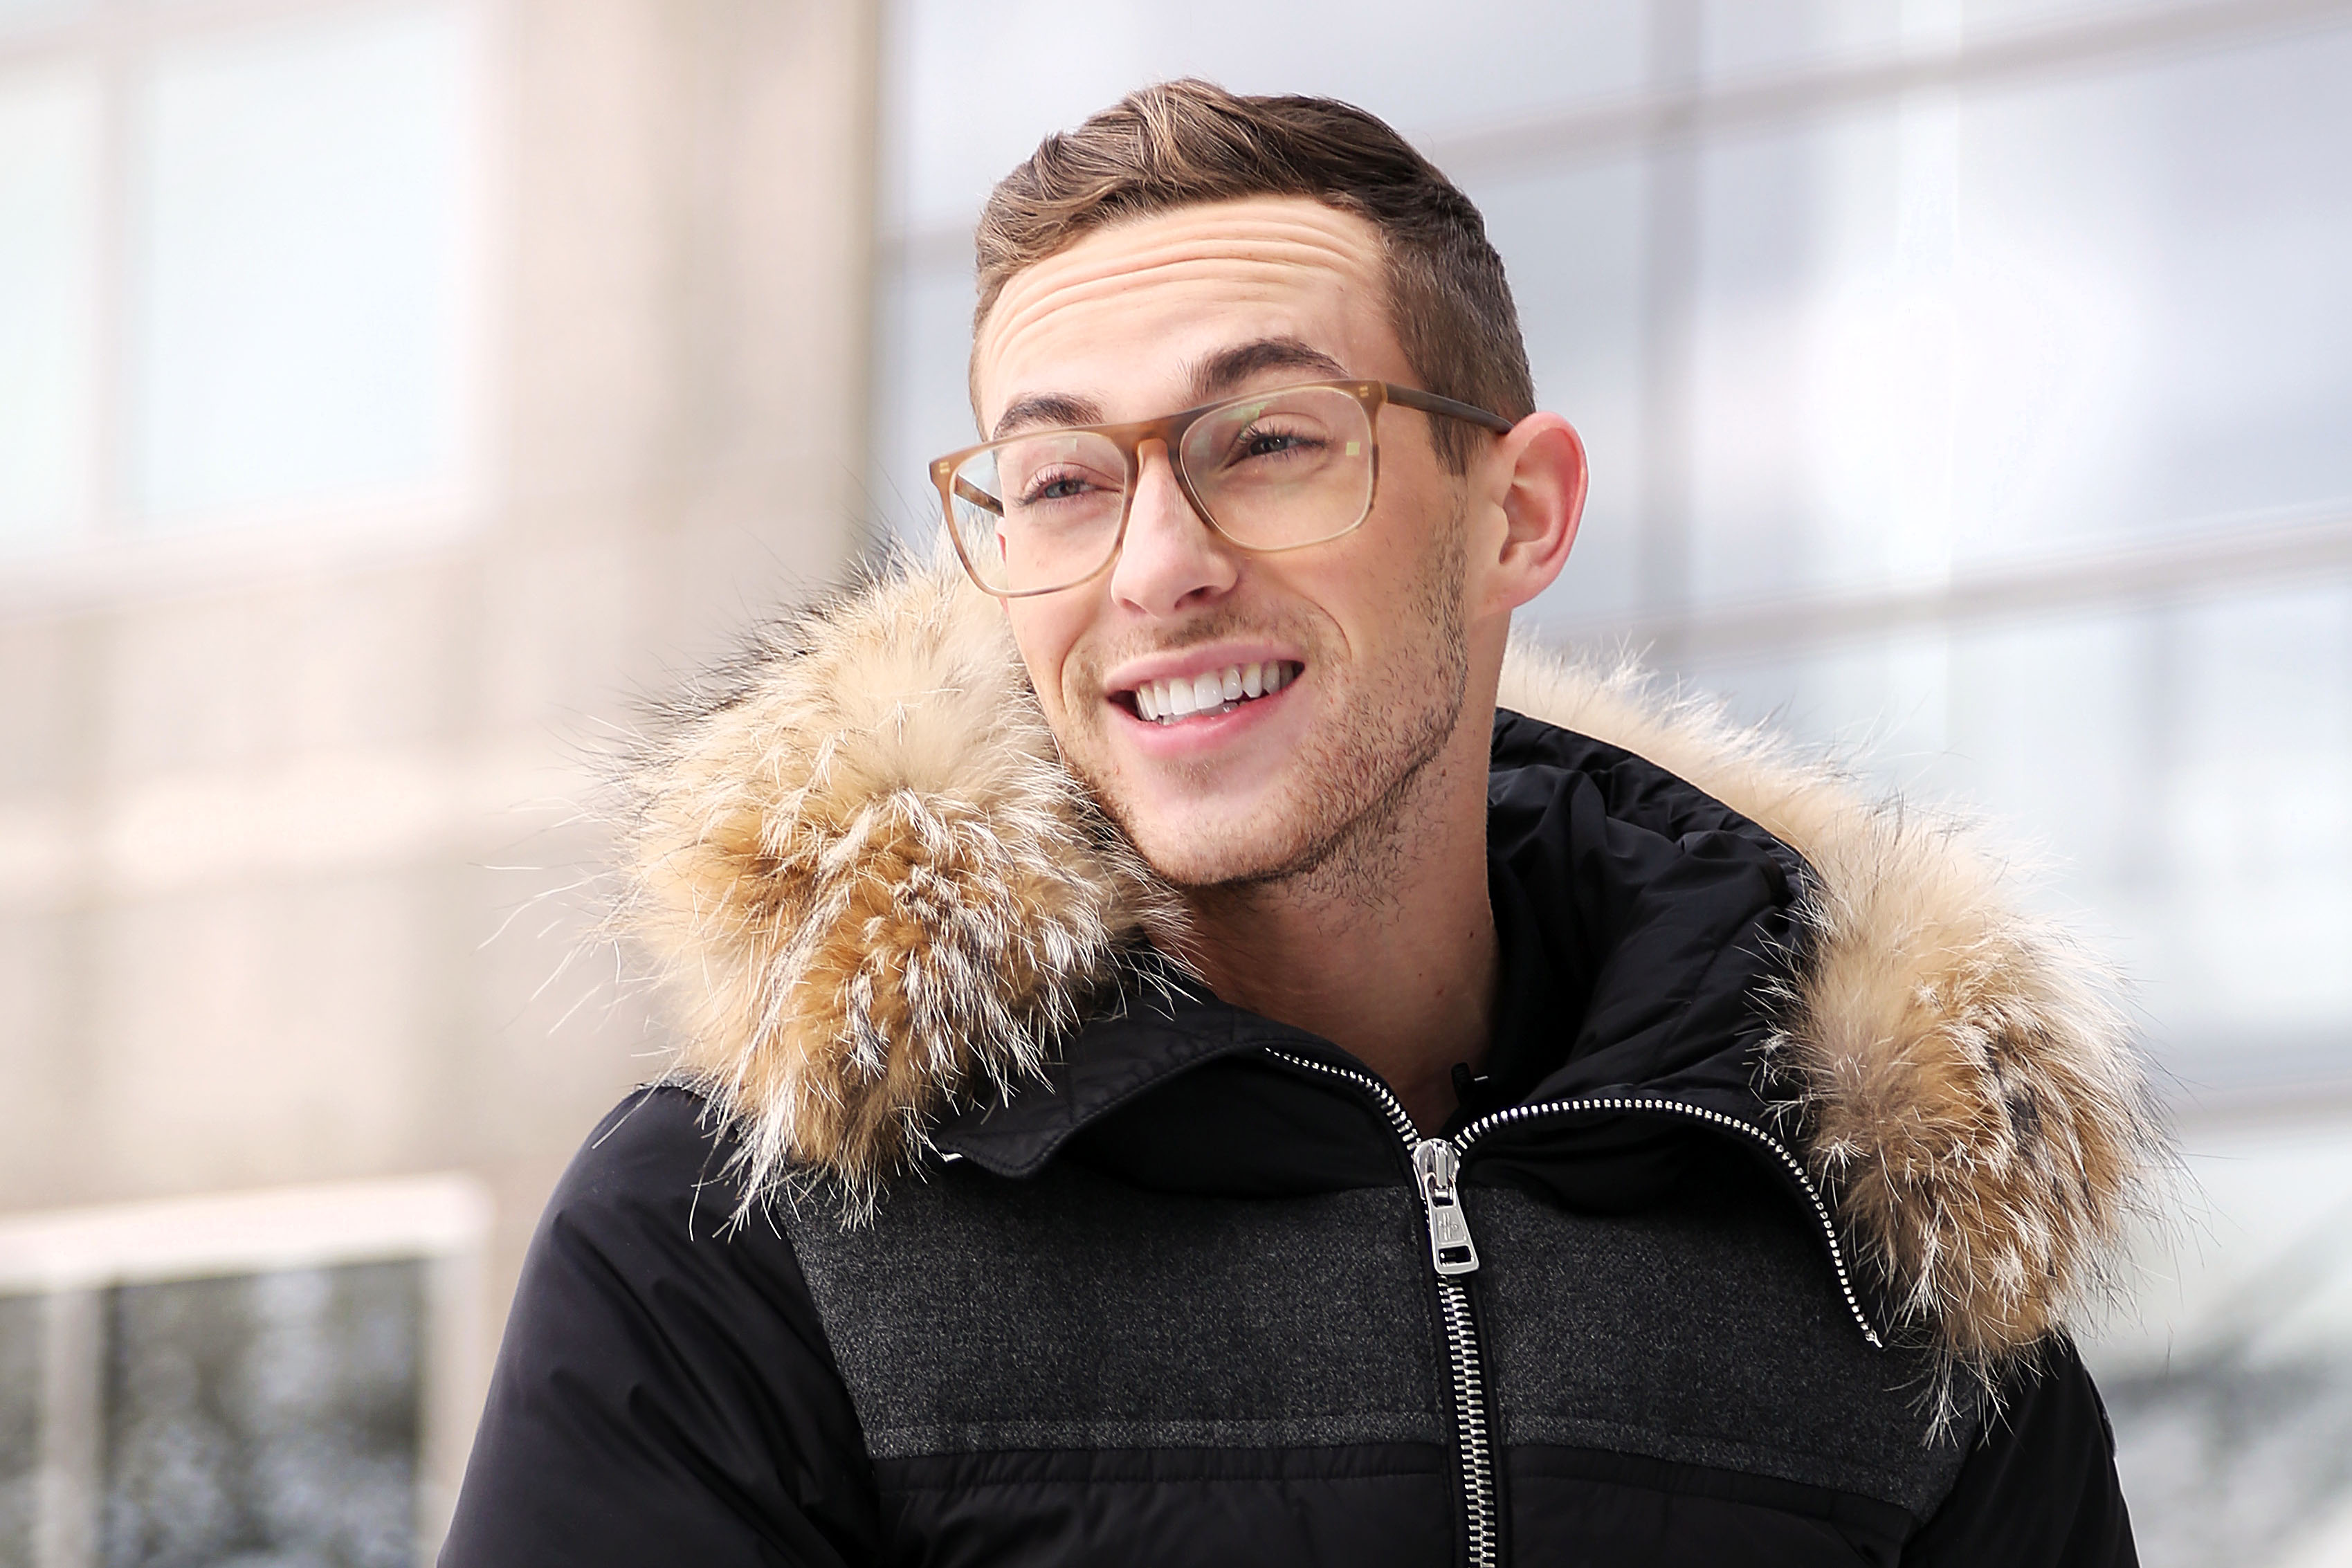 Adam Rippon Was Welcomed Home From the Olympics With Boxes of His Favorite $12 Wine